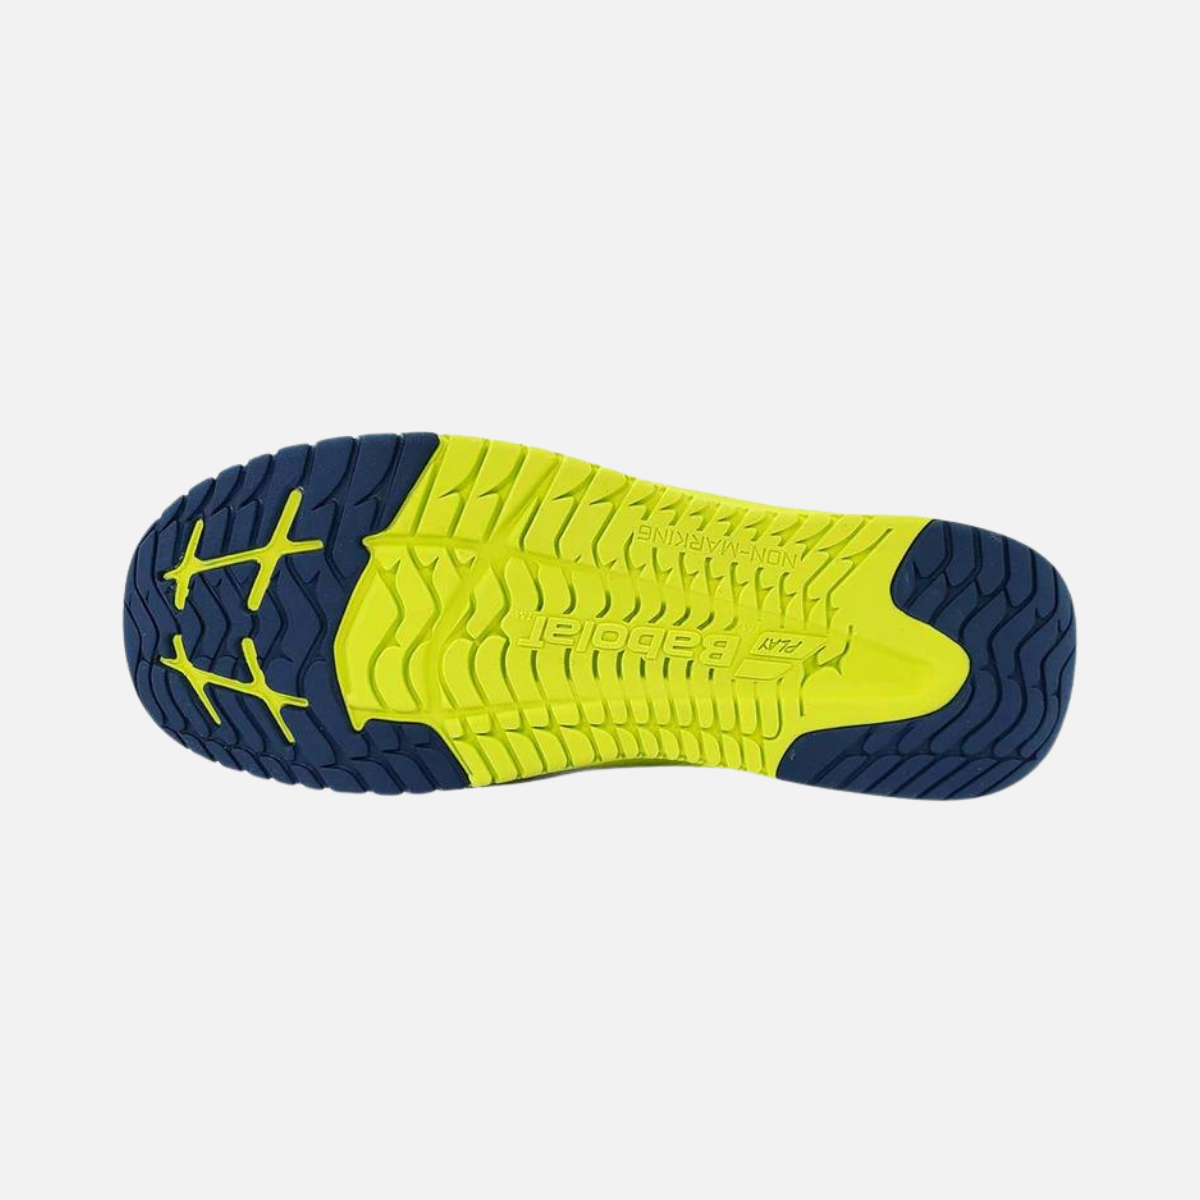 Babolat Pulsion All Court Junior Kids Tennis Shoes -Blue/Yellow